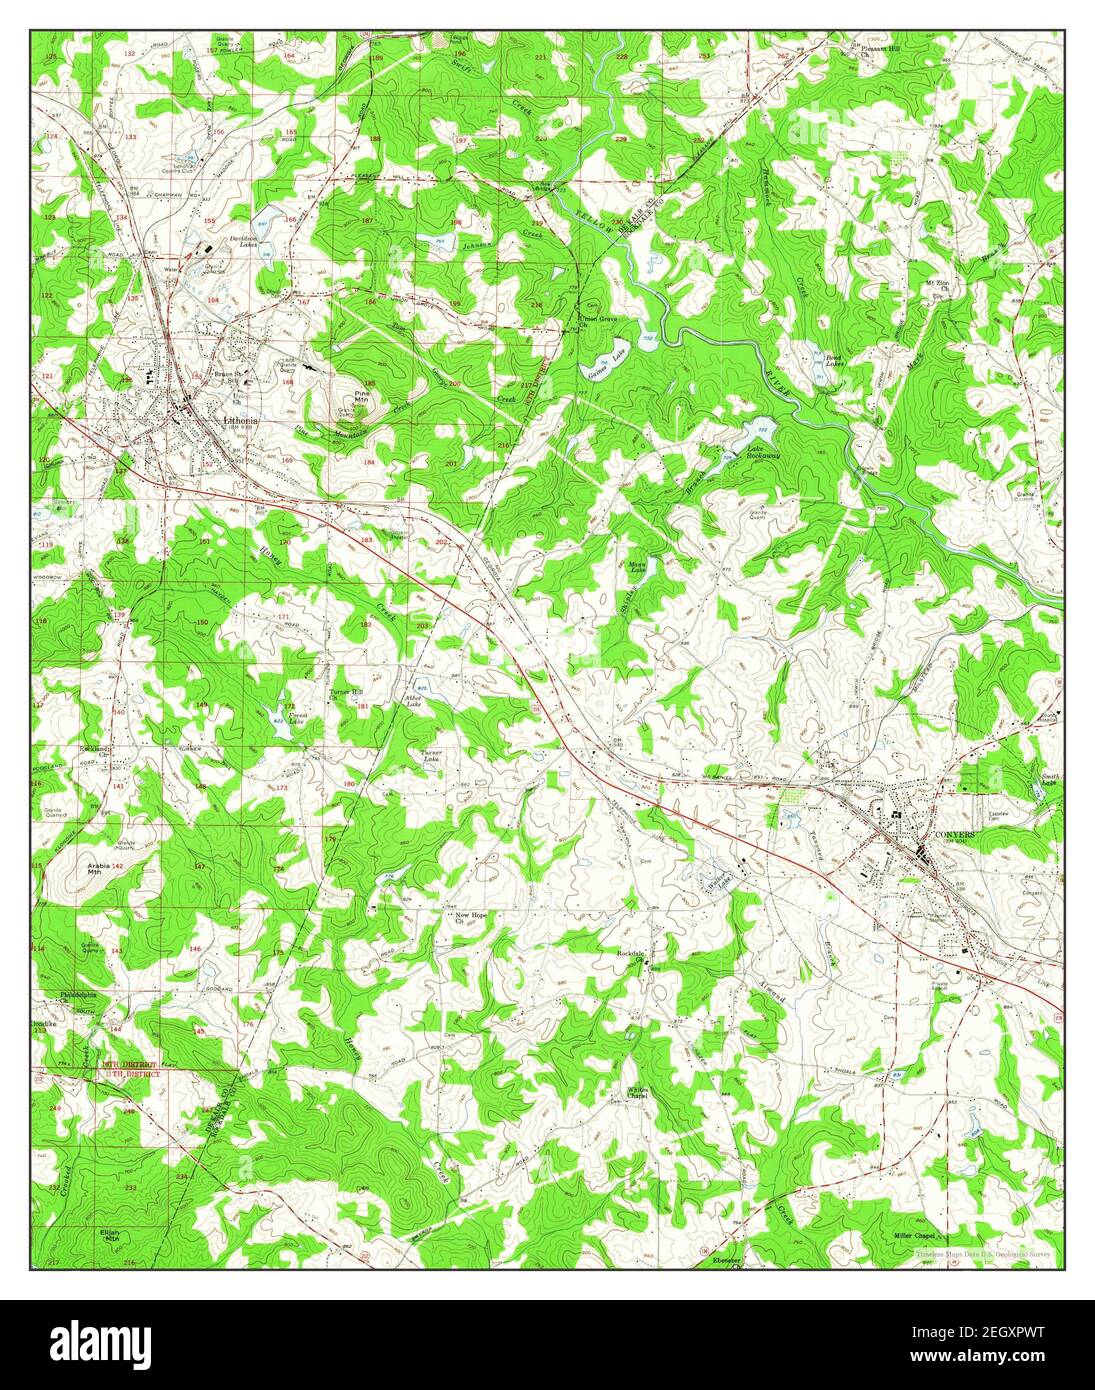 Conyers, Georgia, map 1956, 1:24000, United States of America by Timeless Maps, data U.S. Geological Survey Stock Photo